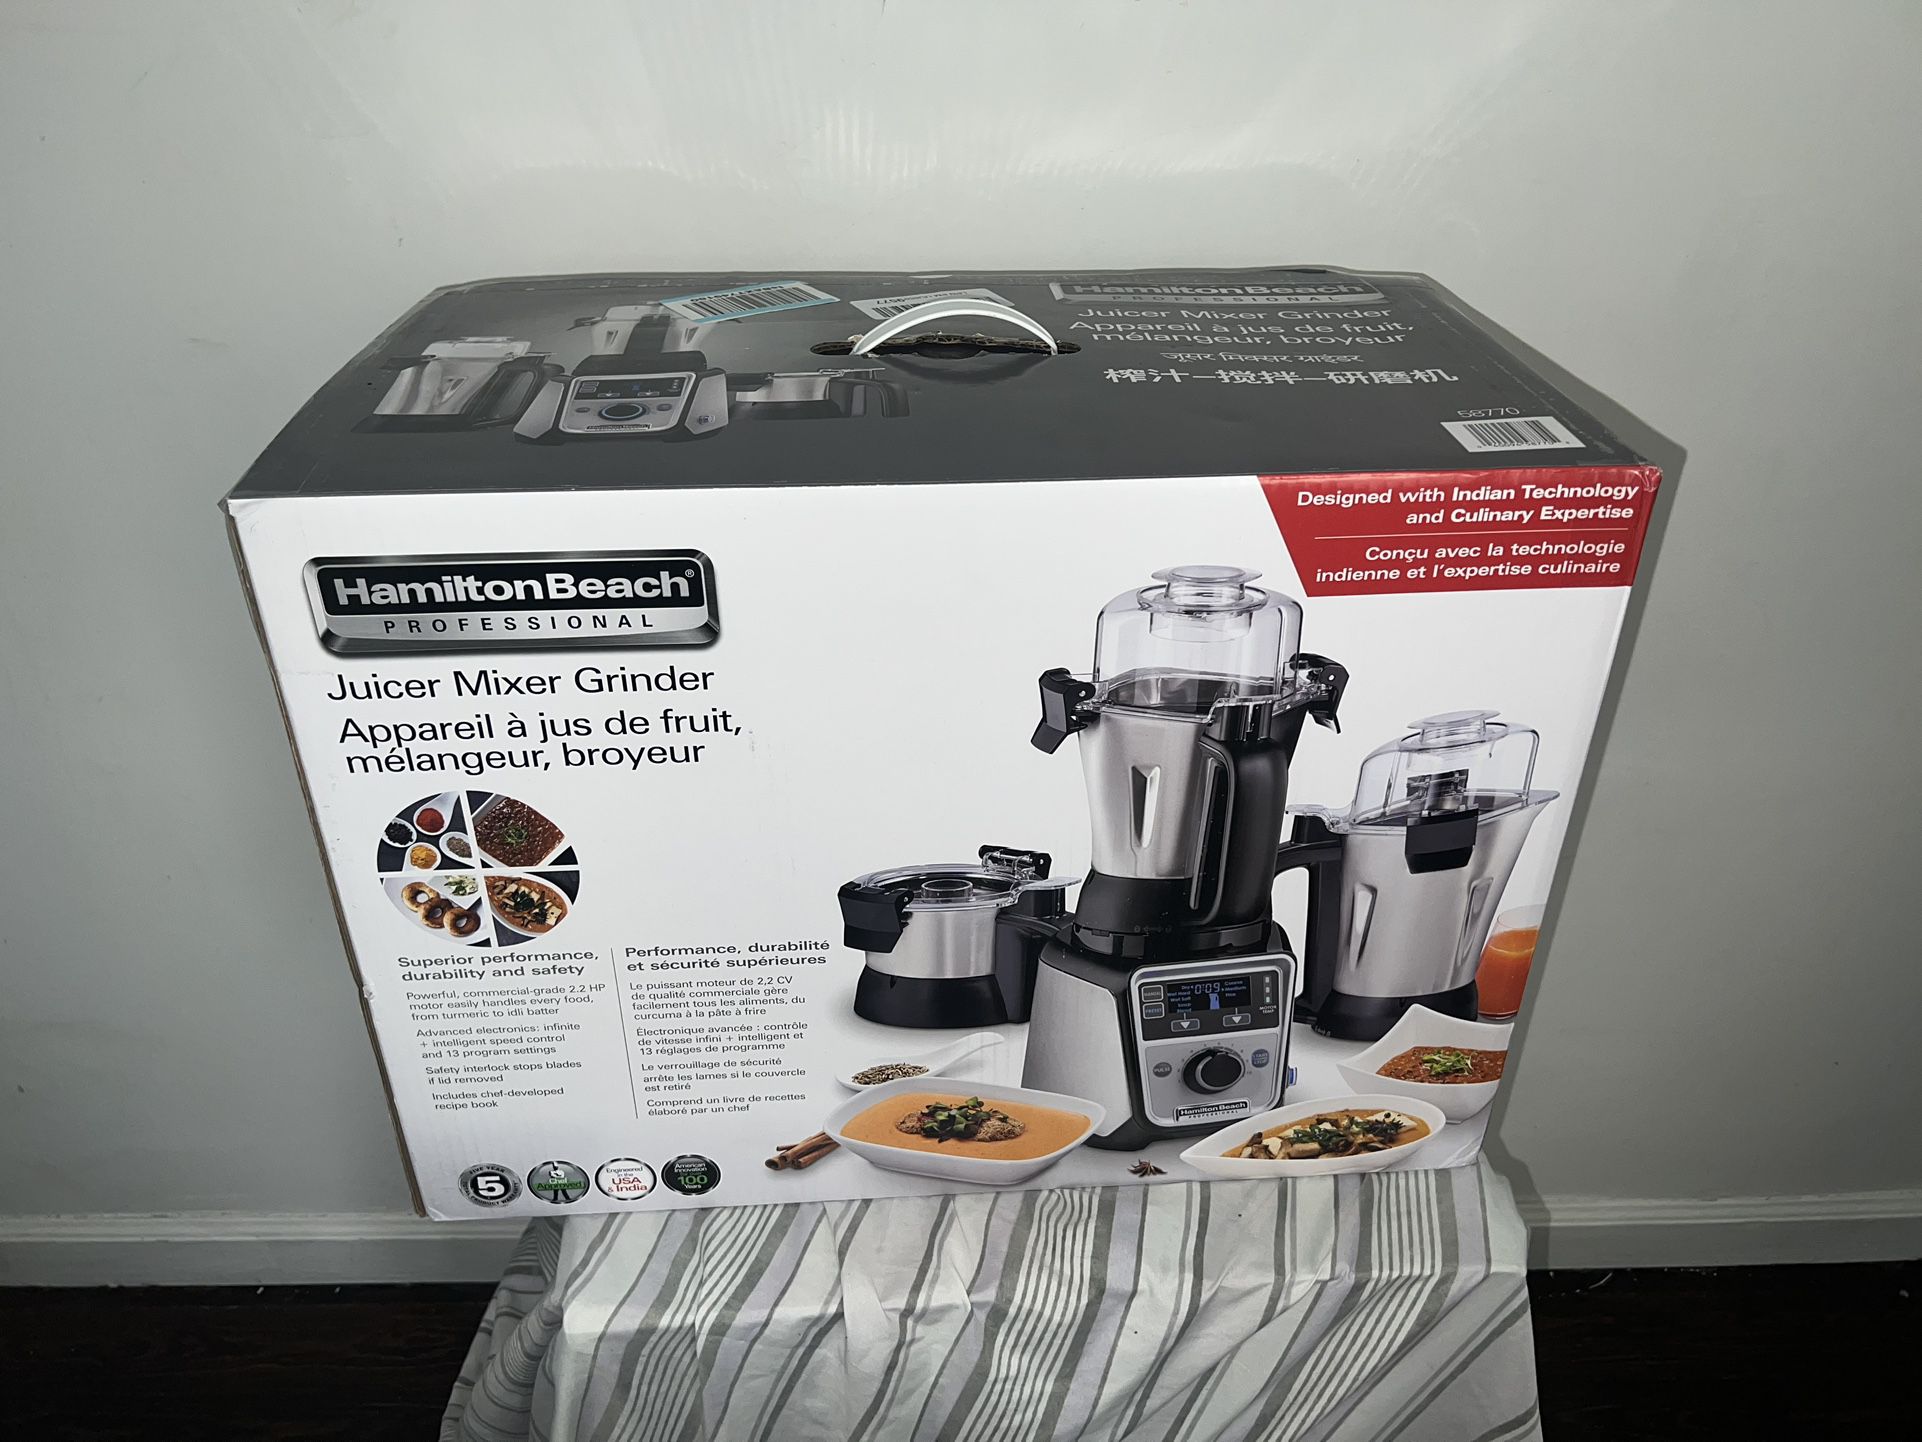 Hamilton Beach Professional 4-in-1 Juicer Mixer Grinder for Sale in New  York, NY - OfferUp